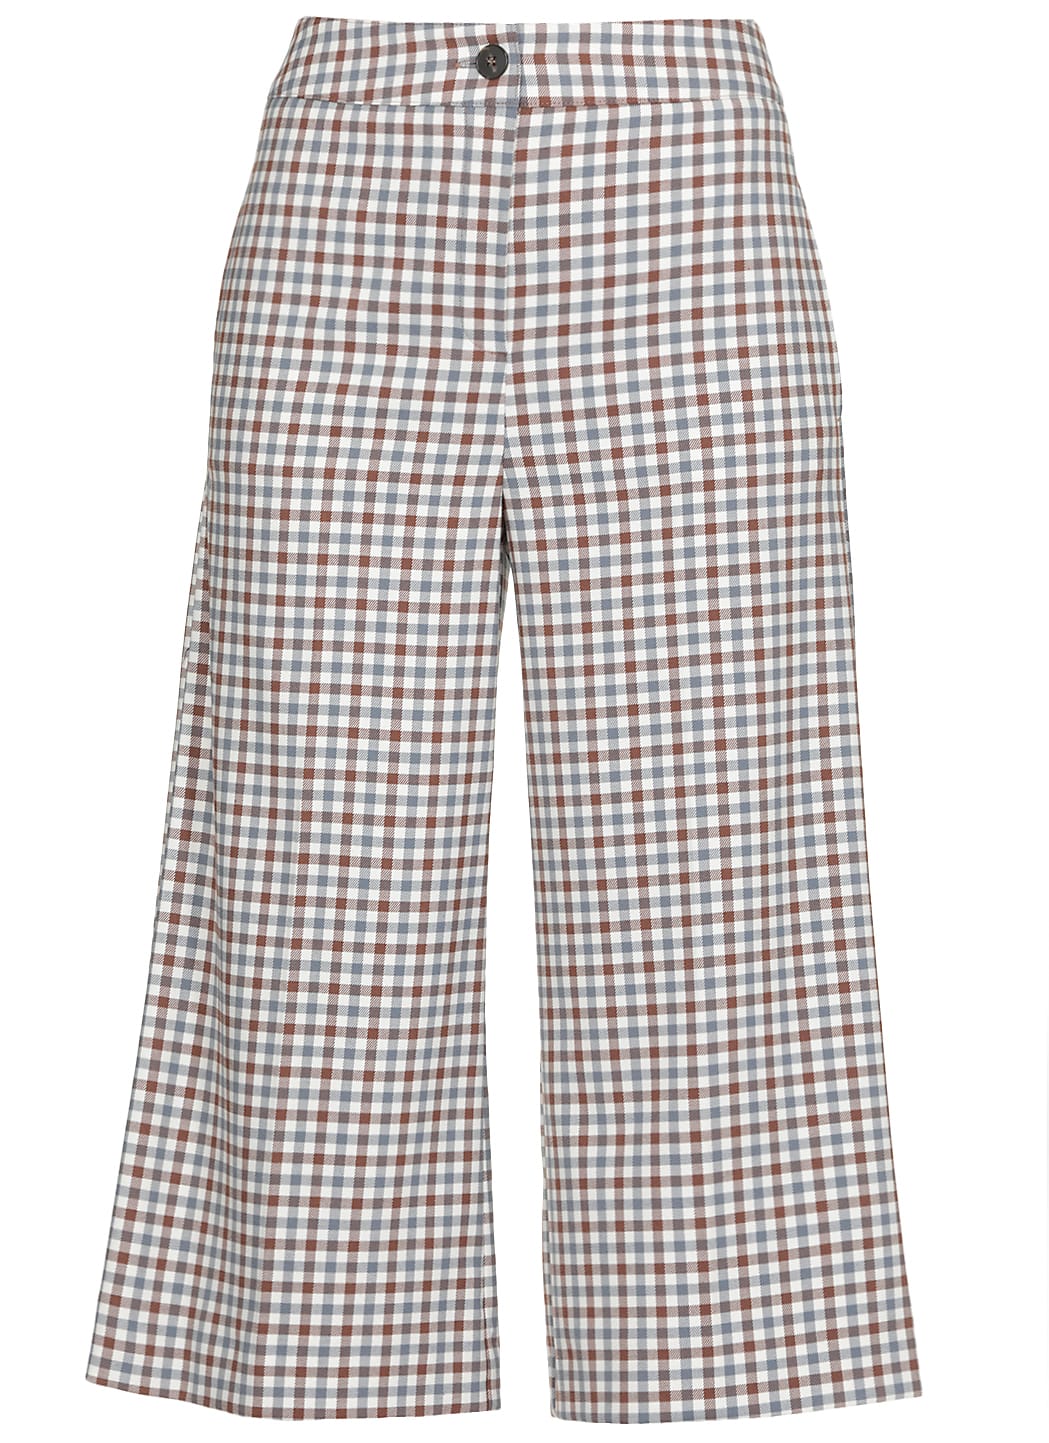 Marella Check Patterned Trousers